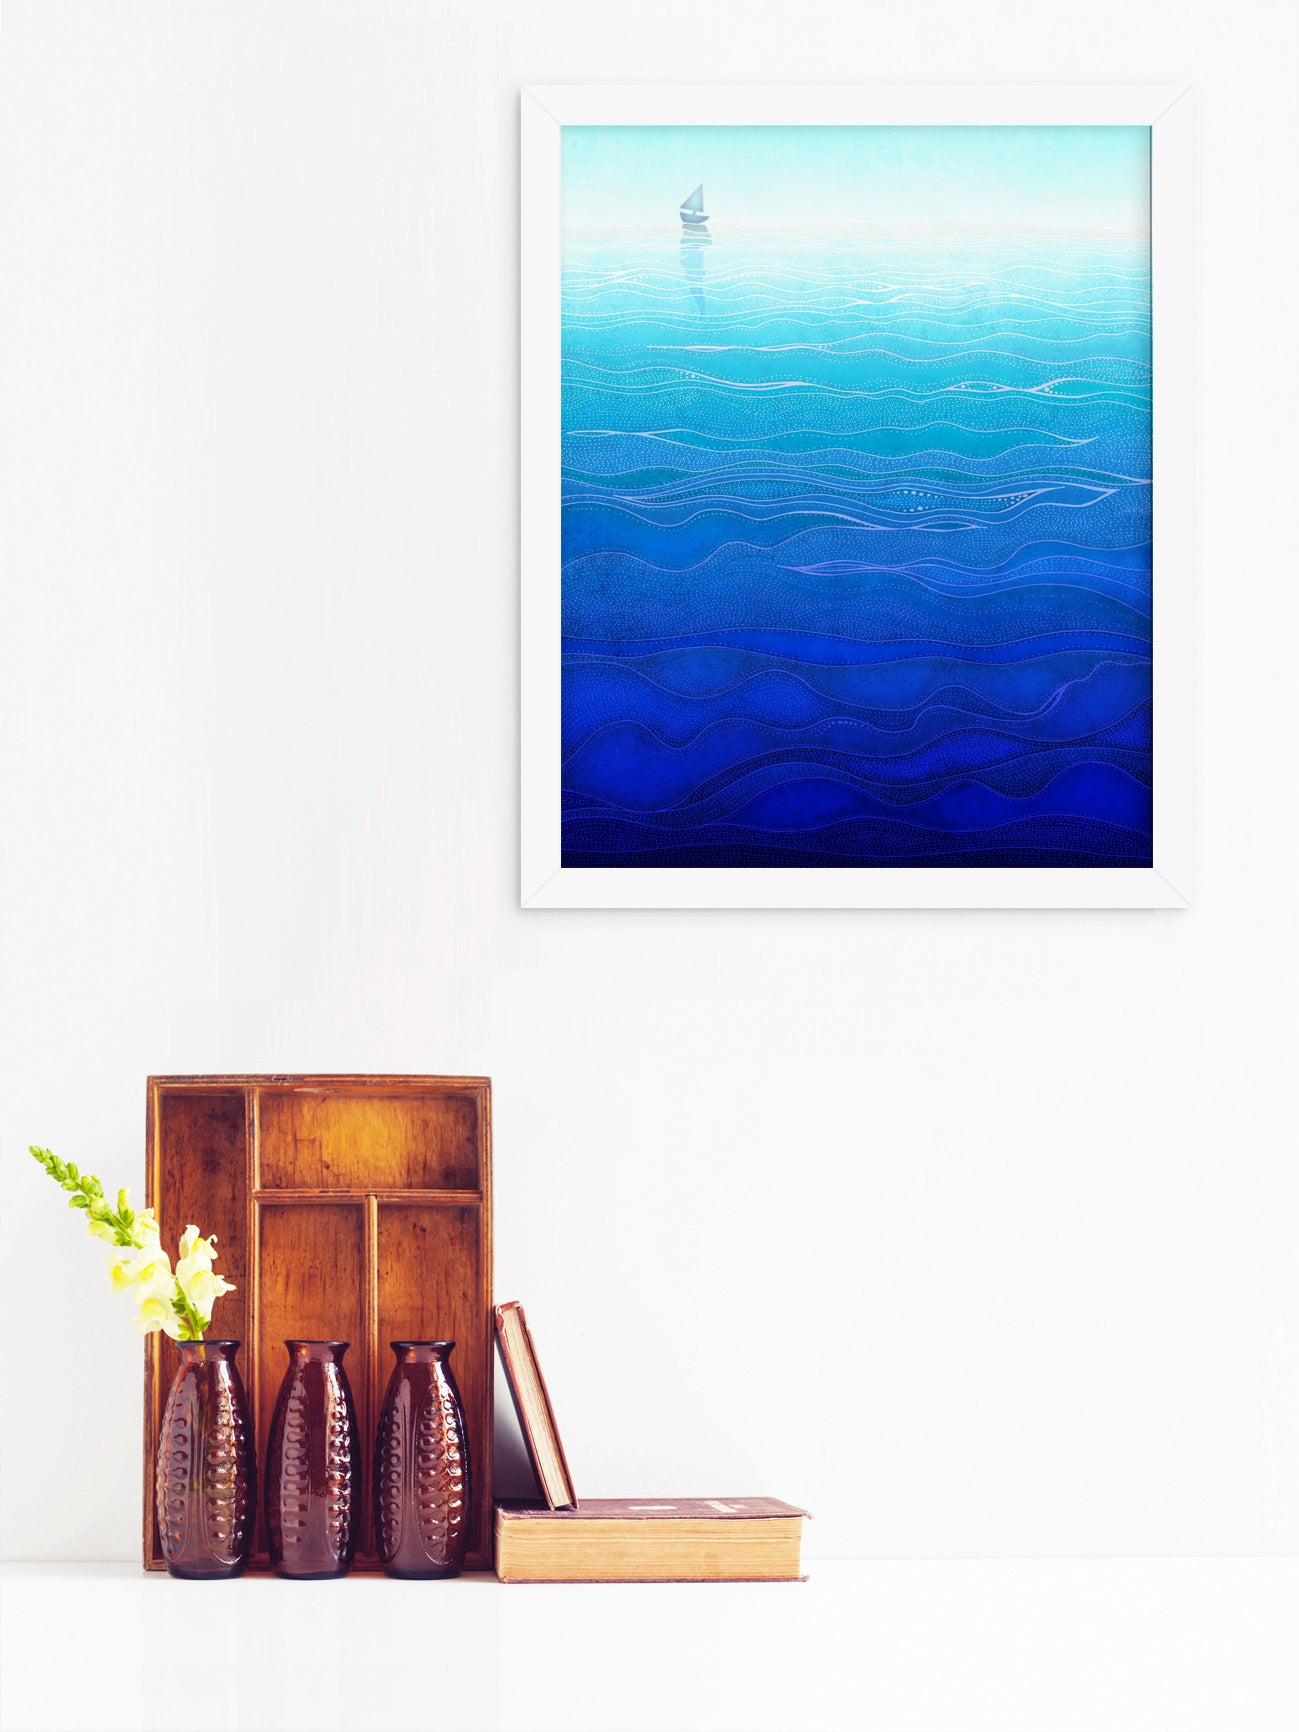 Lonely way - Framed Art Print